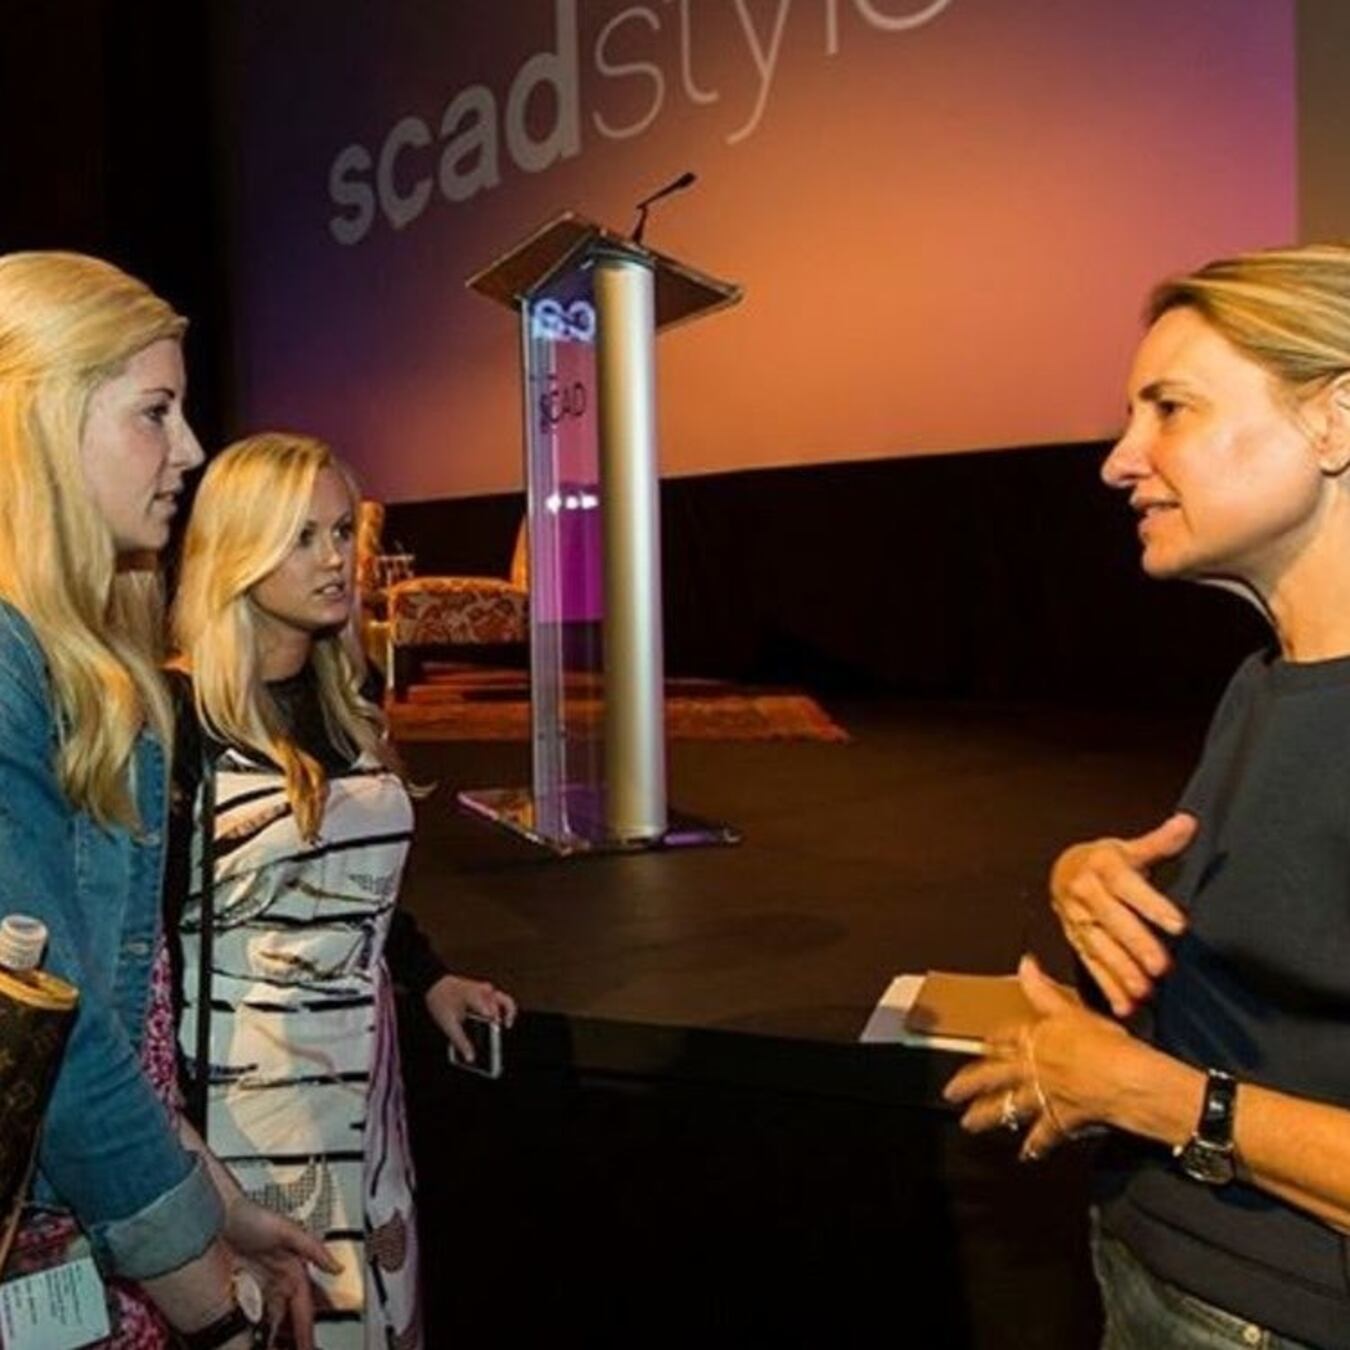 Project-SCADstyle 2015 in photos